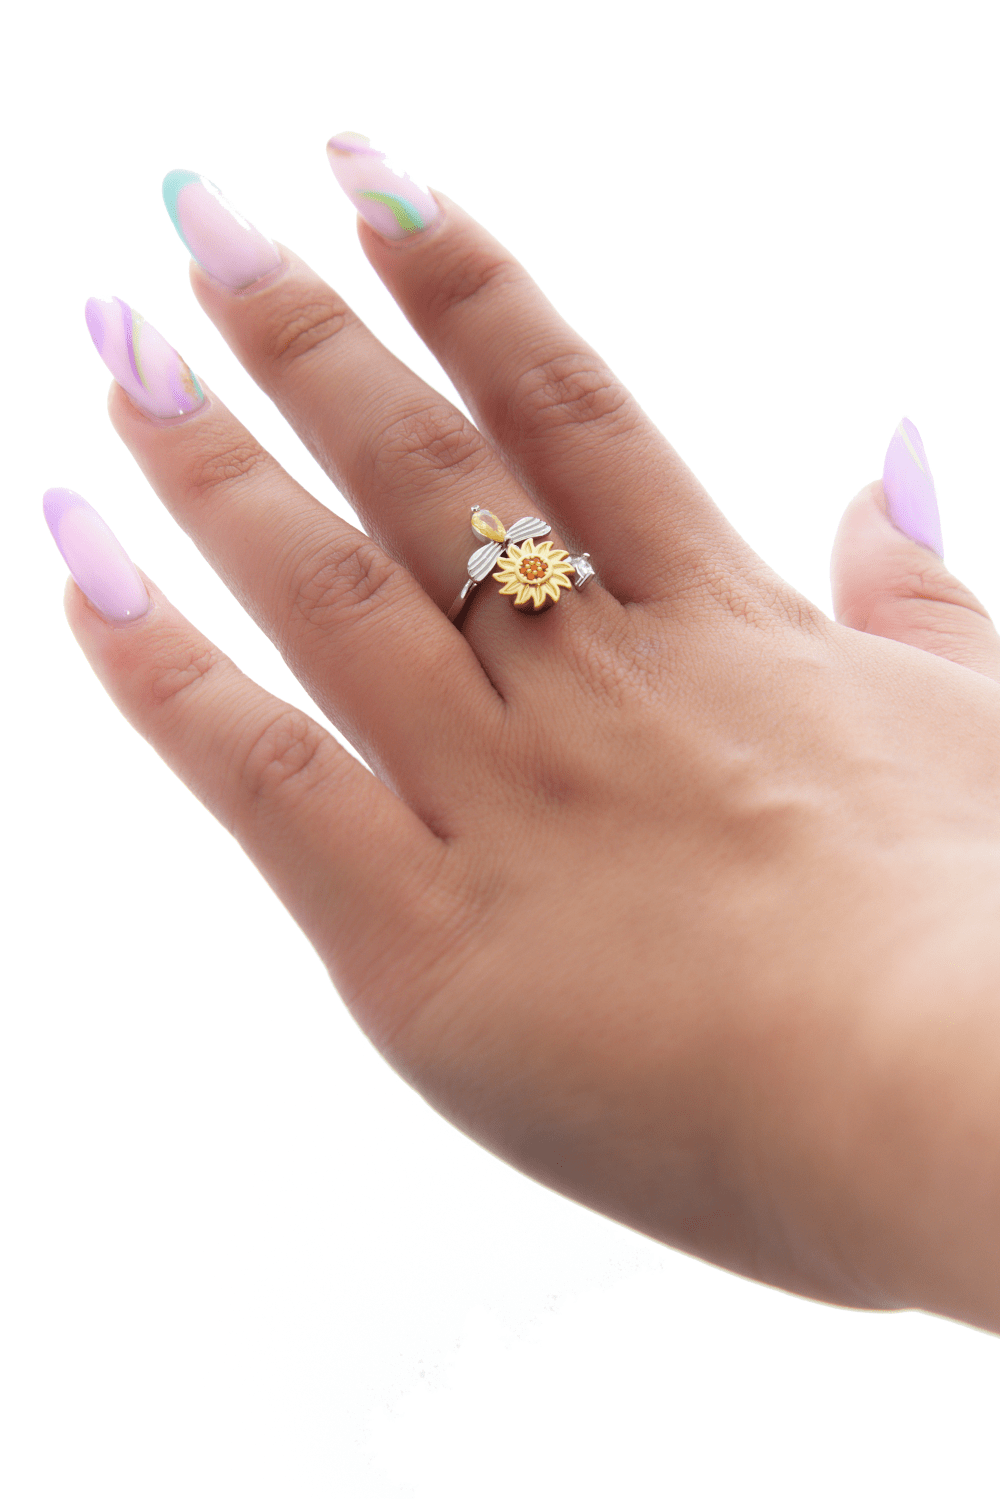 To My Pride and Joy  Sunflower Fidget Ring